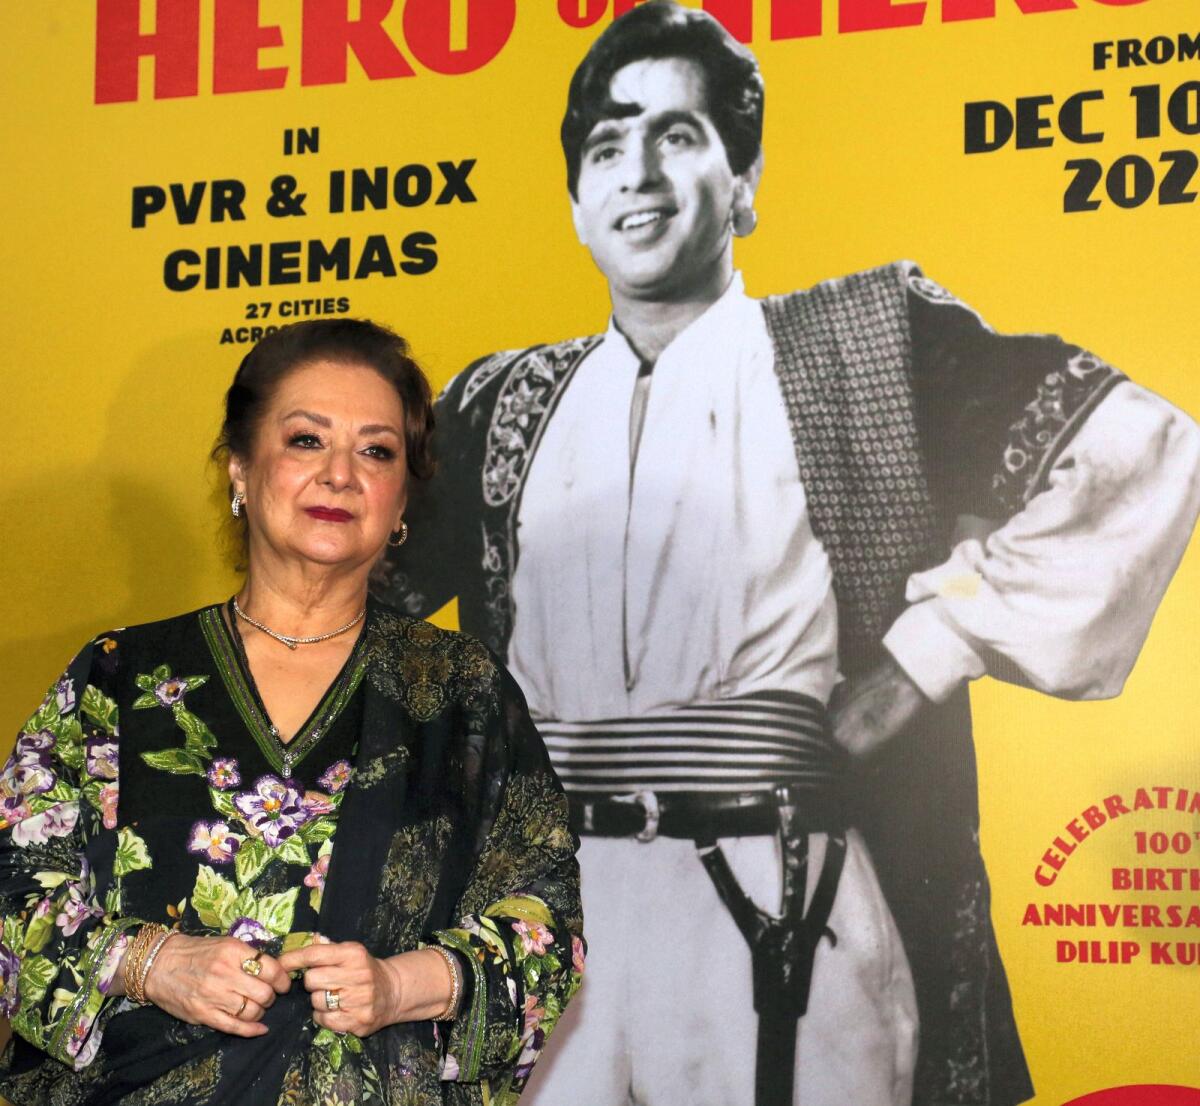 Bollywood actress Saira Banu at an event ‘Dilip Kumar – Hero of Heroes: A Film Festival Celebrating 100 years of a Legend of Indian cinema’, marking his 100th birth anniversary